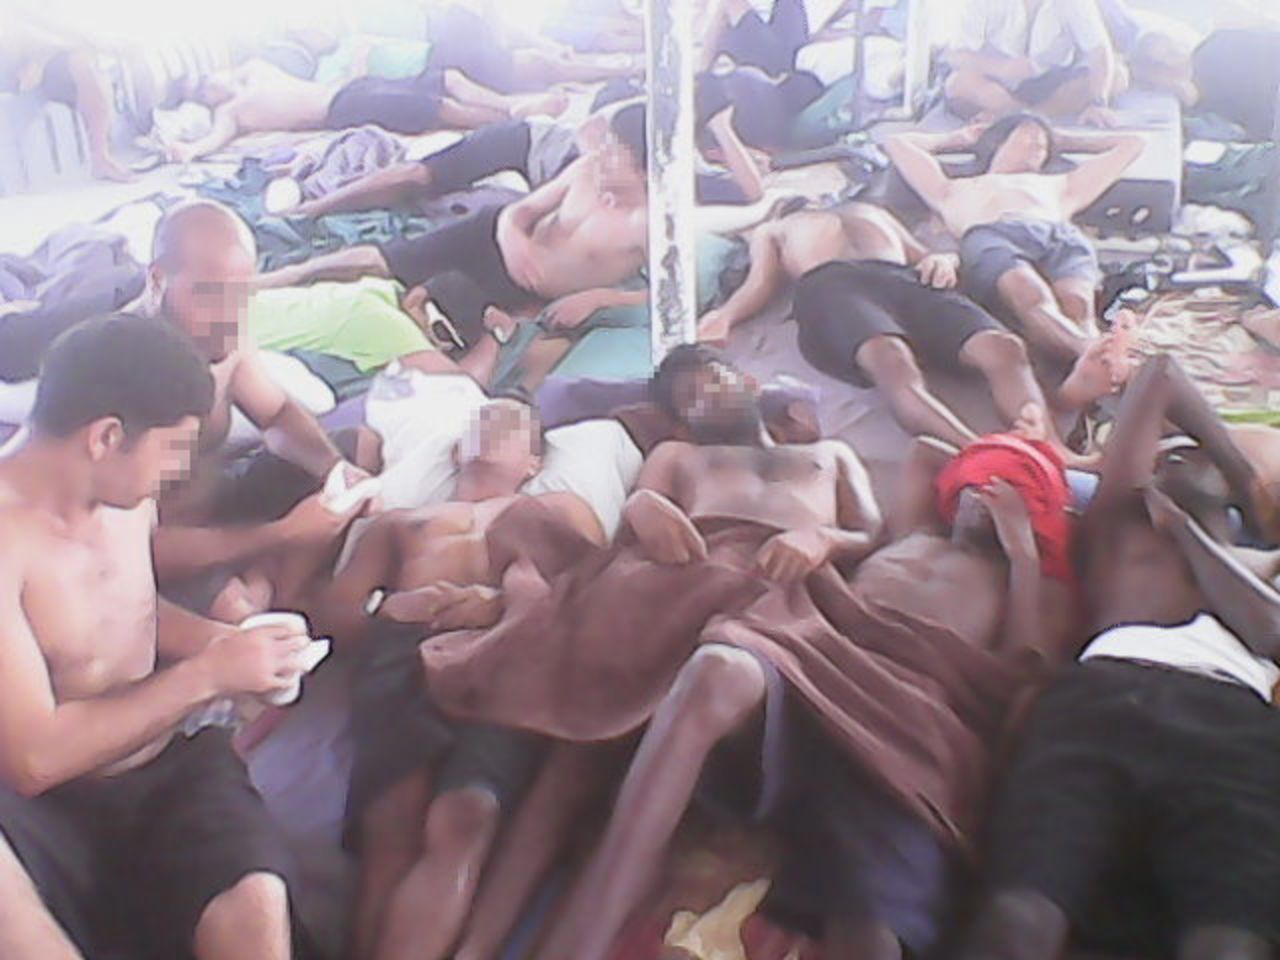 Asylum seekers at the Manus Island detention center lie in the heat after several days of hunger striking. Advocates say as many as 700 are refusing food in protest against plans to send some confirmed refugees to another, less secure facility on the island. This image was said to have been taken on Monday, January 19.